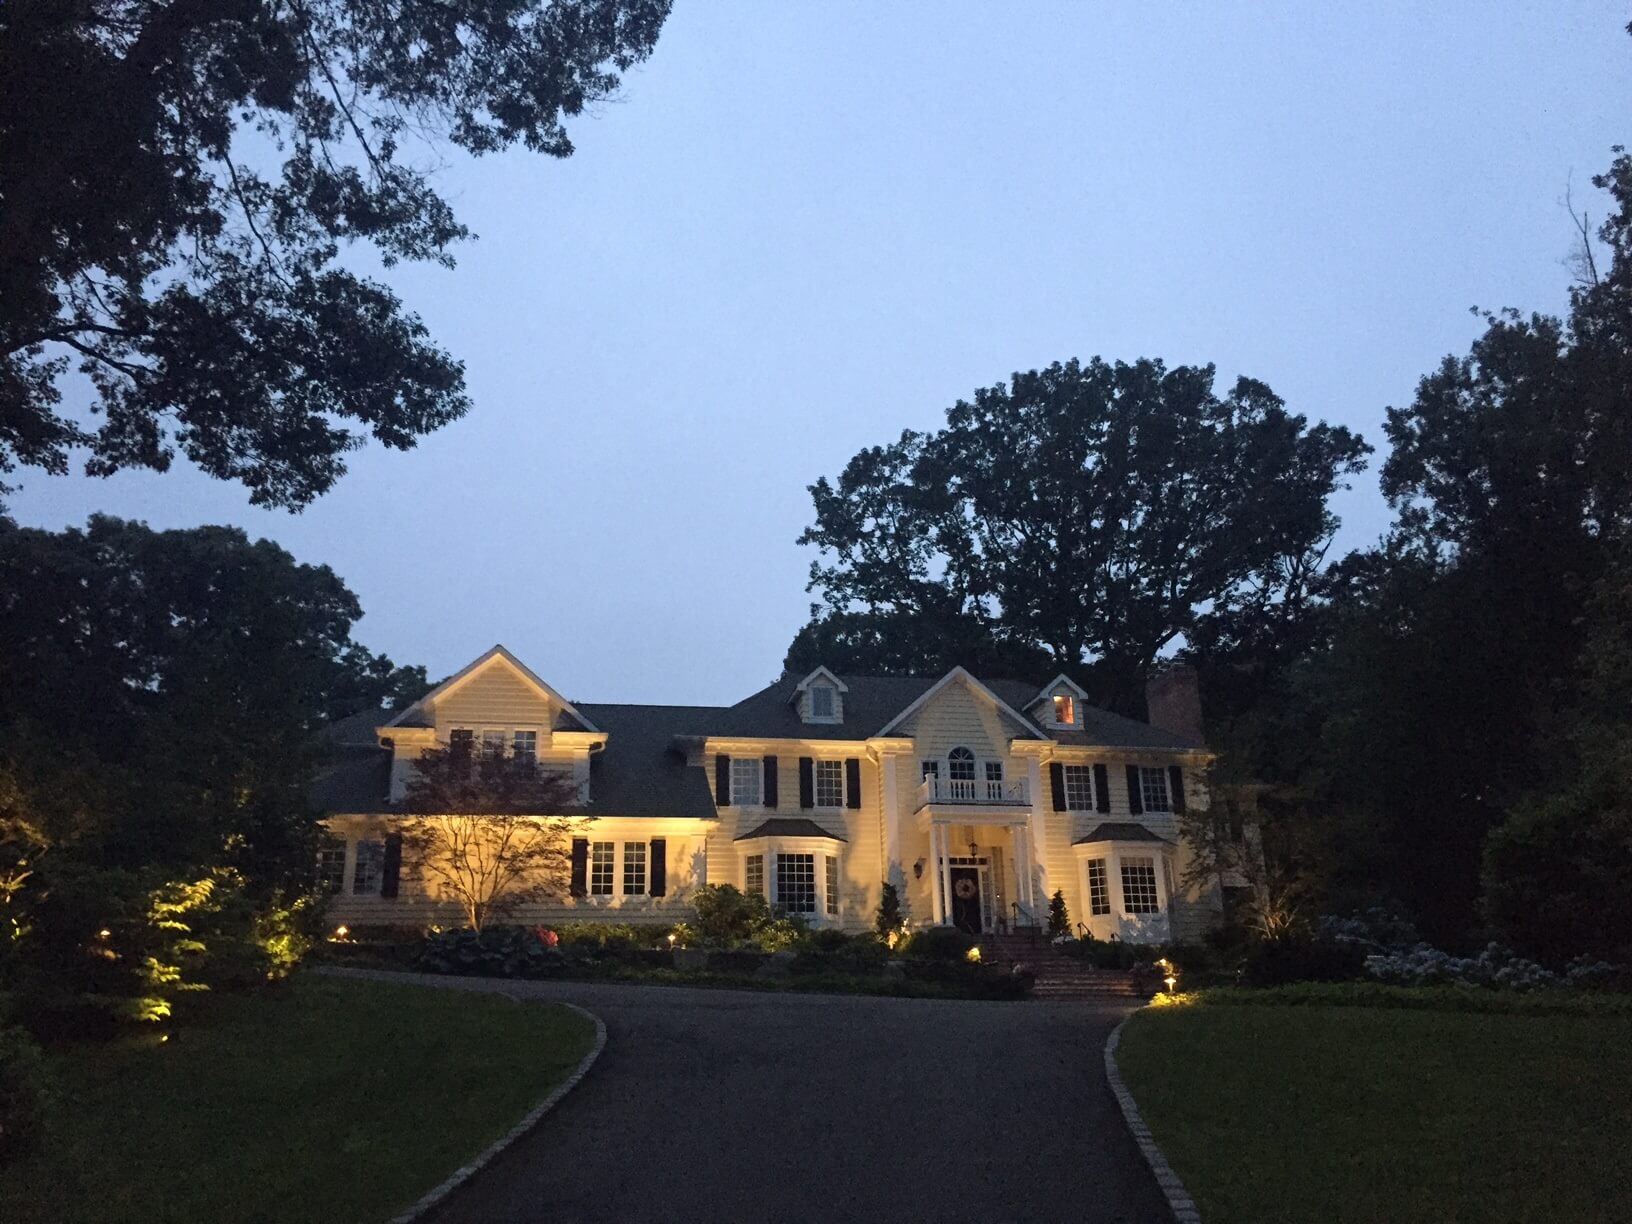 Outdoor lighting on home in the Hamptons, NY